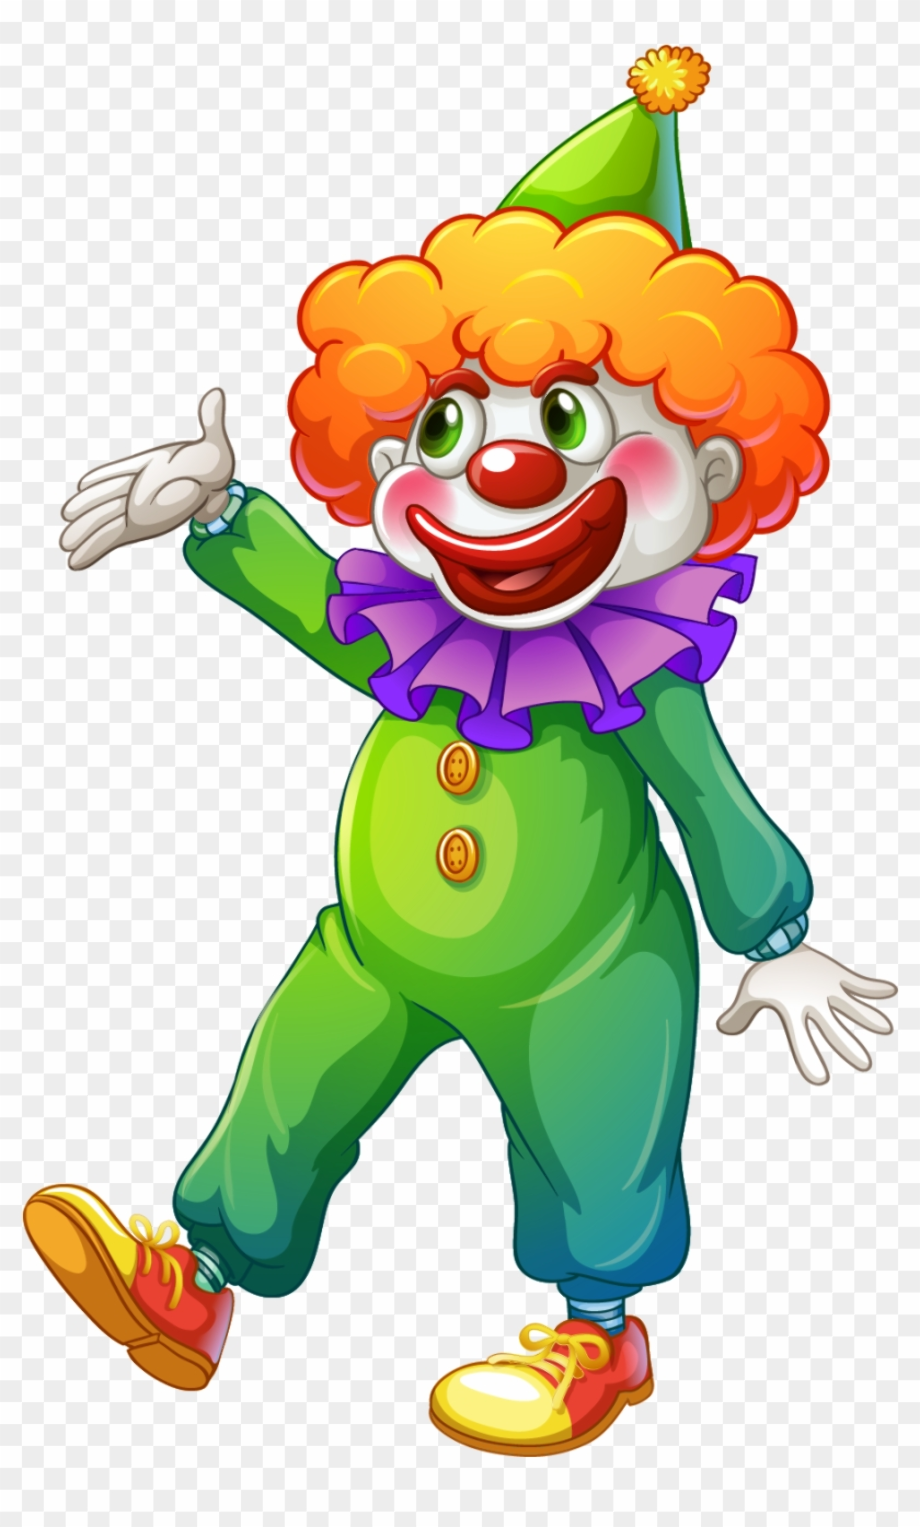 Download High Quality clown clipart carnival Transparent PNG Images